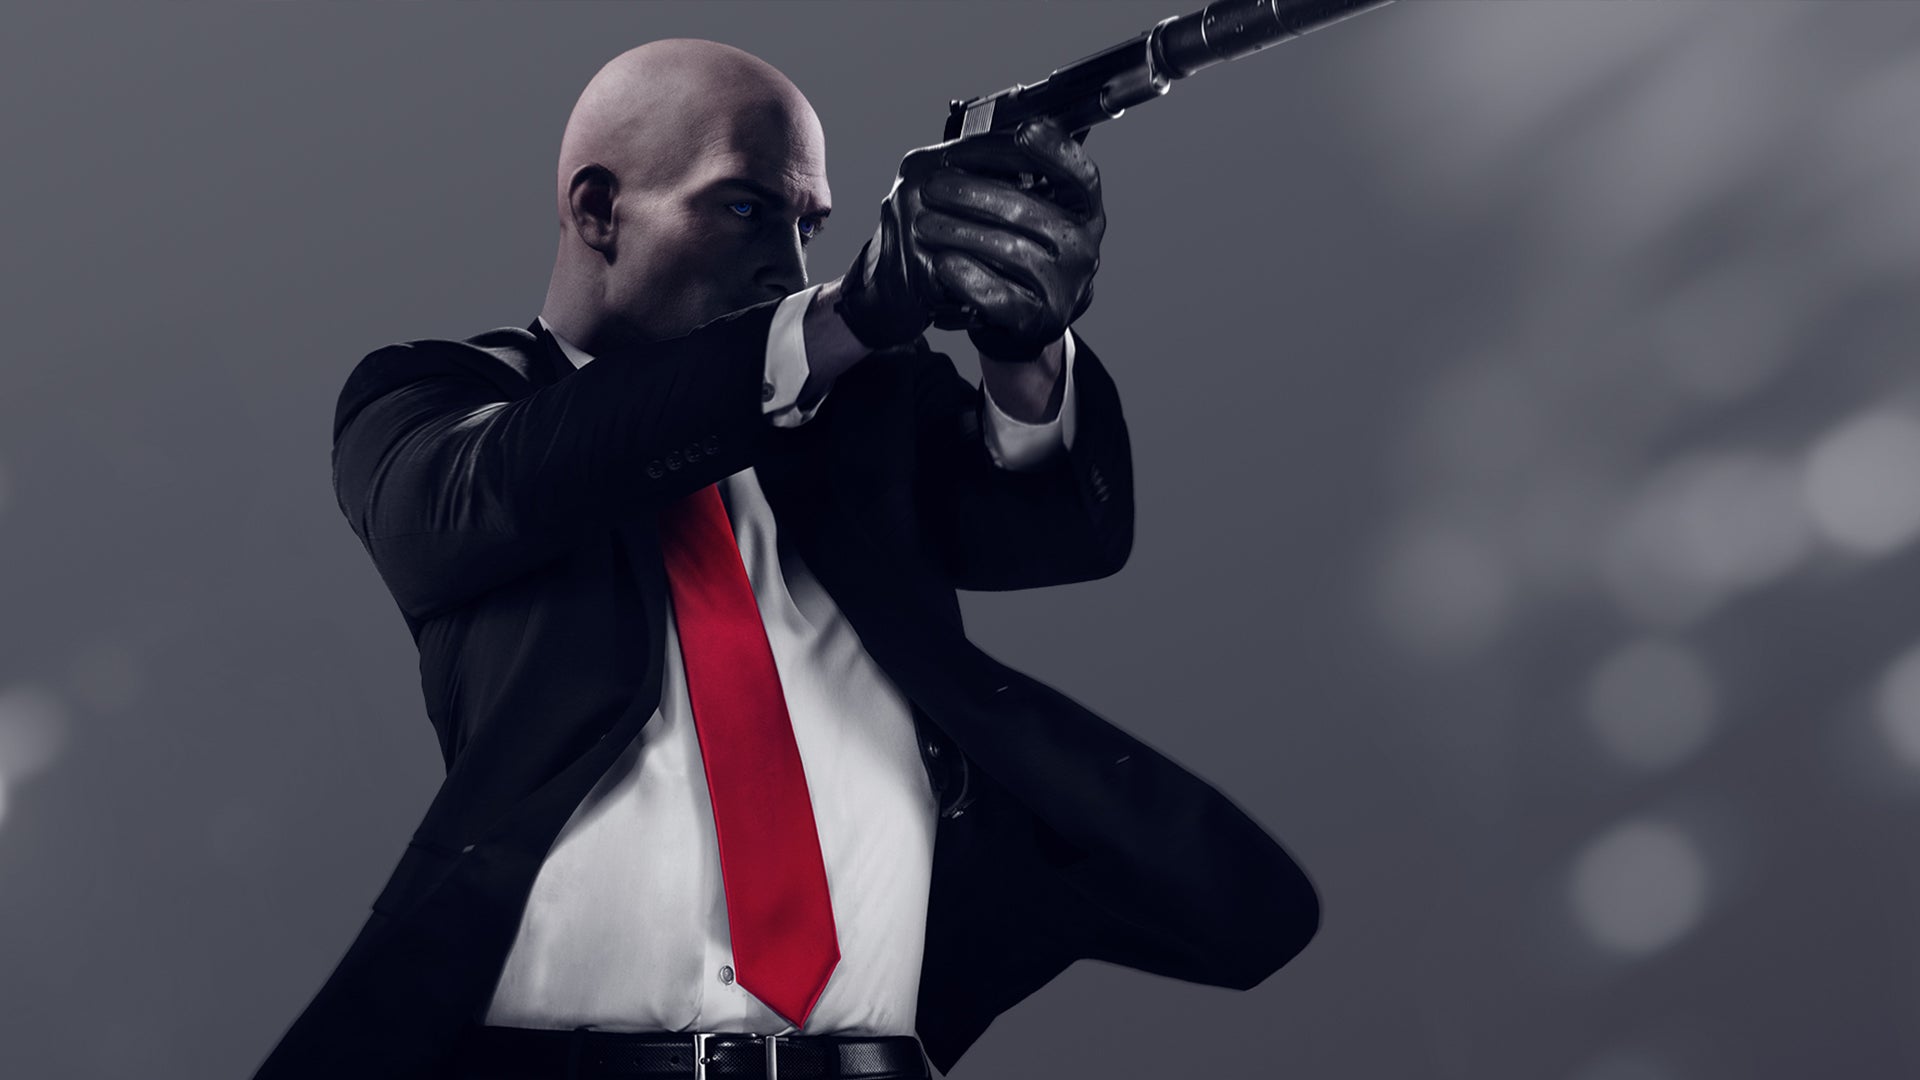 Image for Hitman 2 PC Analysis: Complete Settings Breakdown + Xbox One X Comparison!